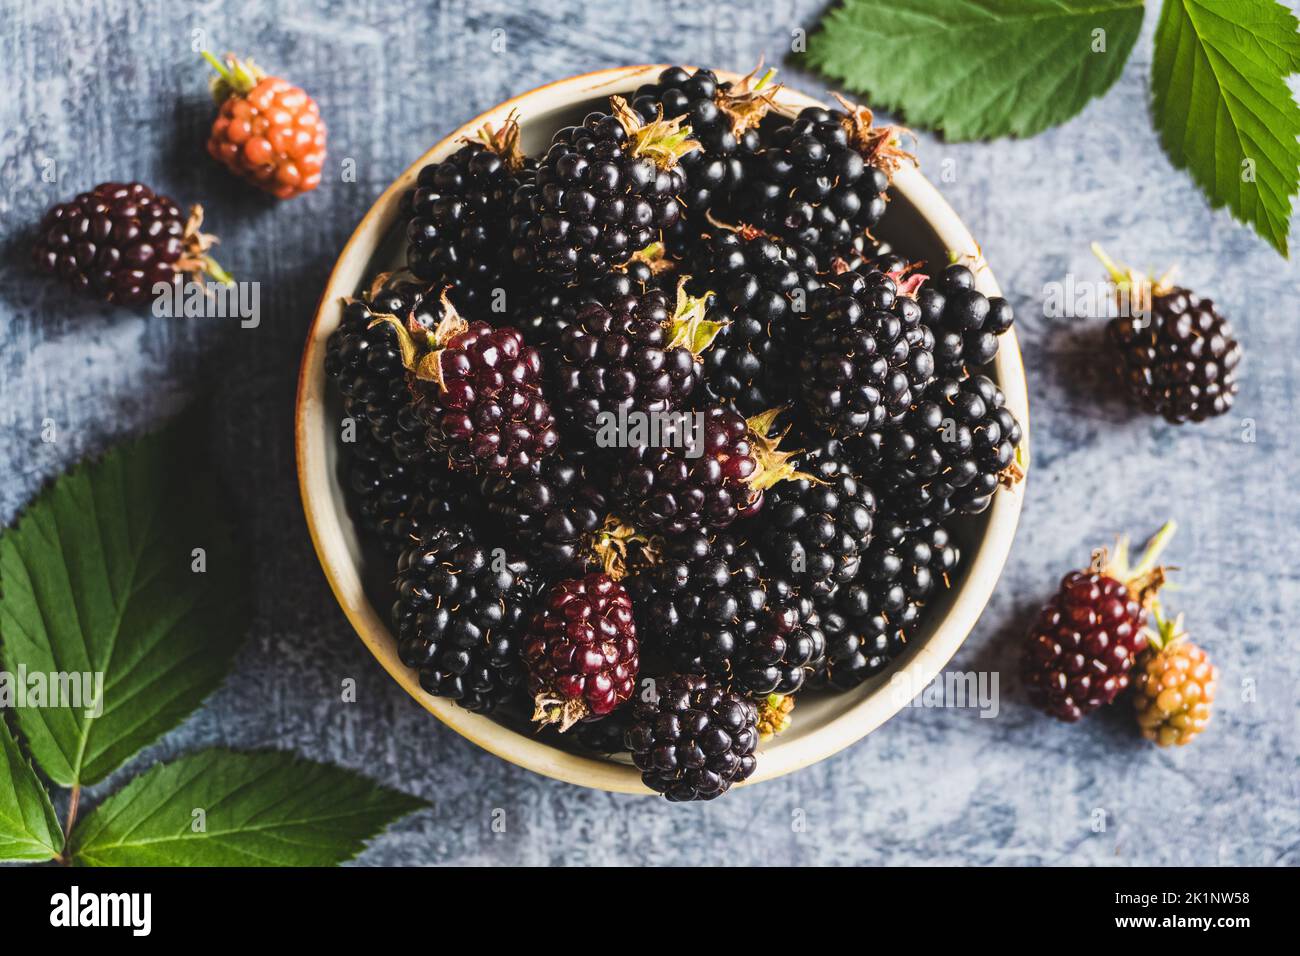 Blackberry fruits on in a bowl, food background, ripe blackberries closeup Stock Photo